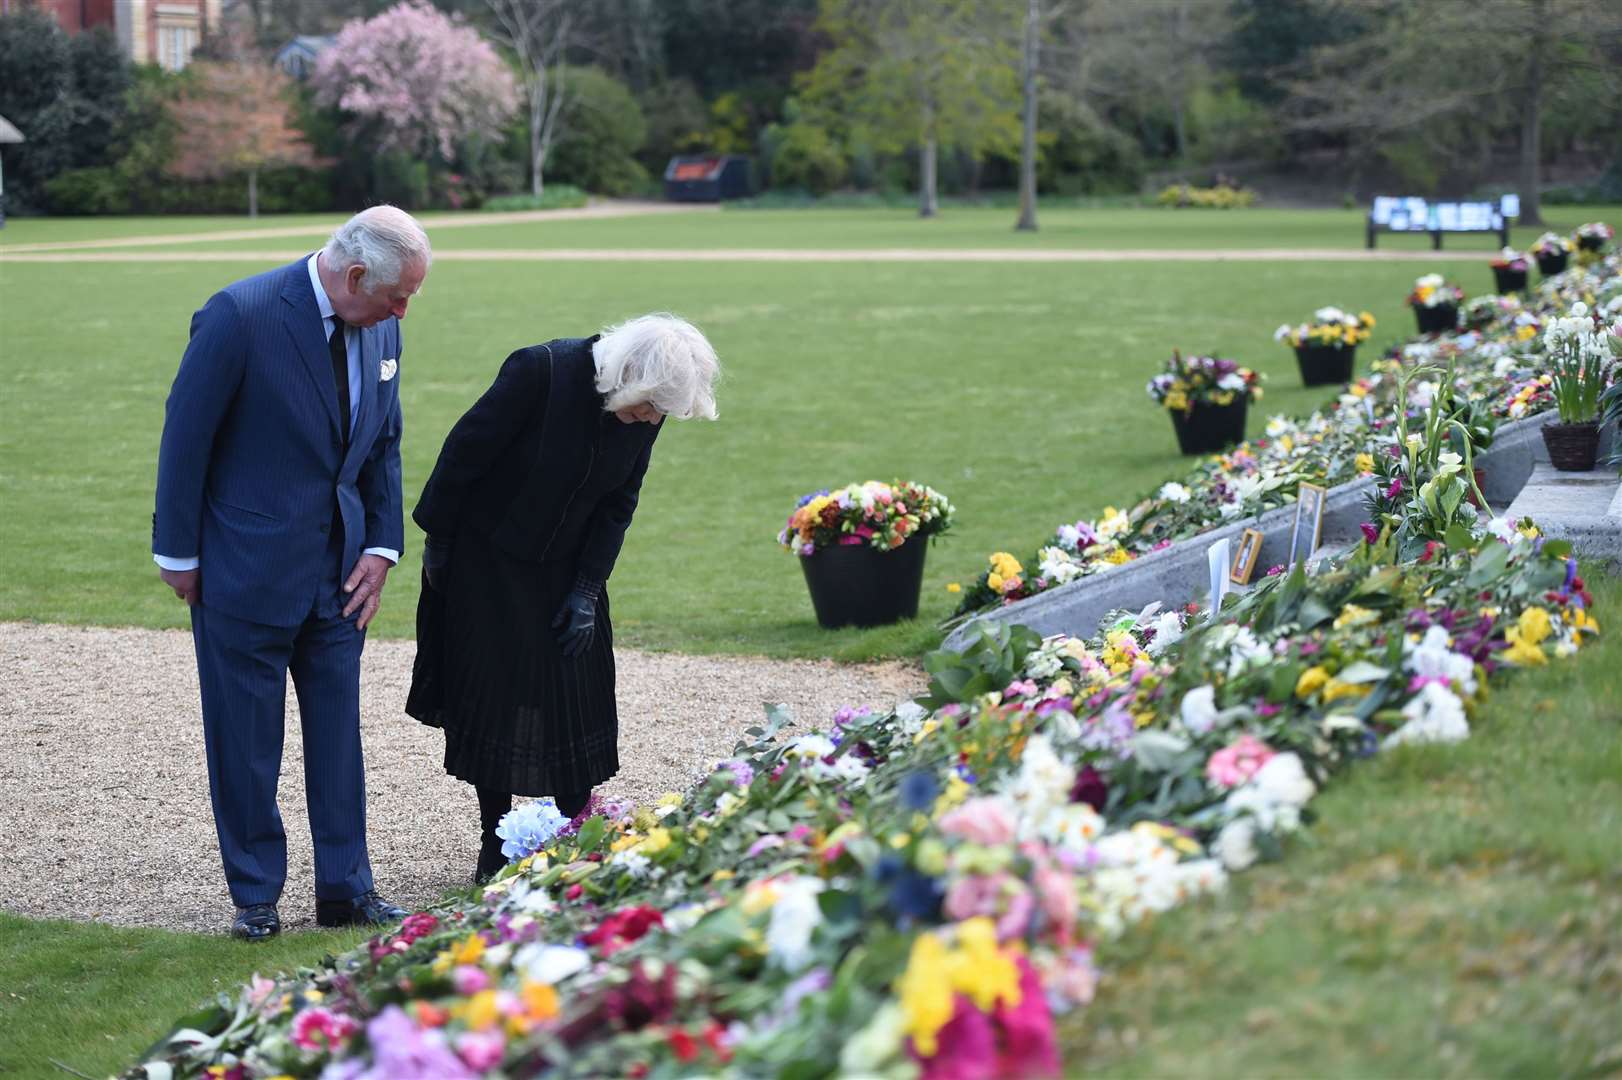 The Prince of Wales and the Duchess of Cornwall visit the gardens of Marlborough House, London, to view the flowers and messages left by members of the public outside Buckingham Palace (Jeremy Selwyn/Evening Standard/PA)